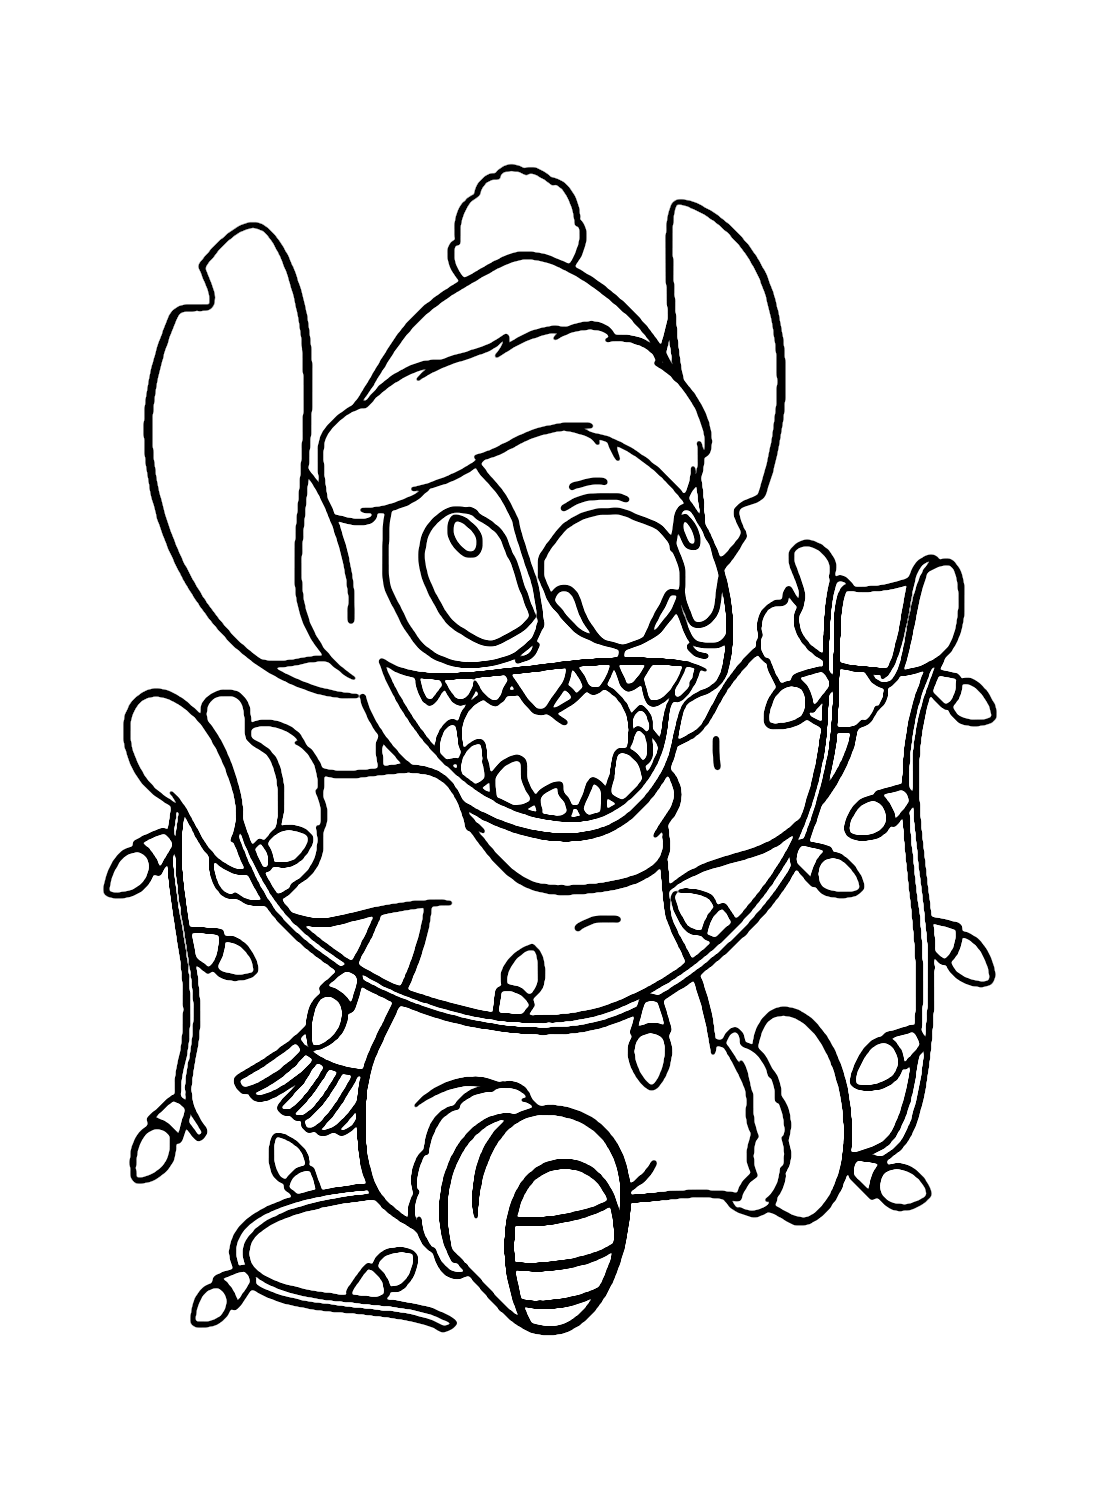 45 Stitch Coloring Pages - ColoringPagesOnly.com